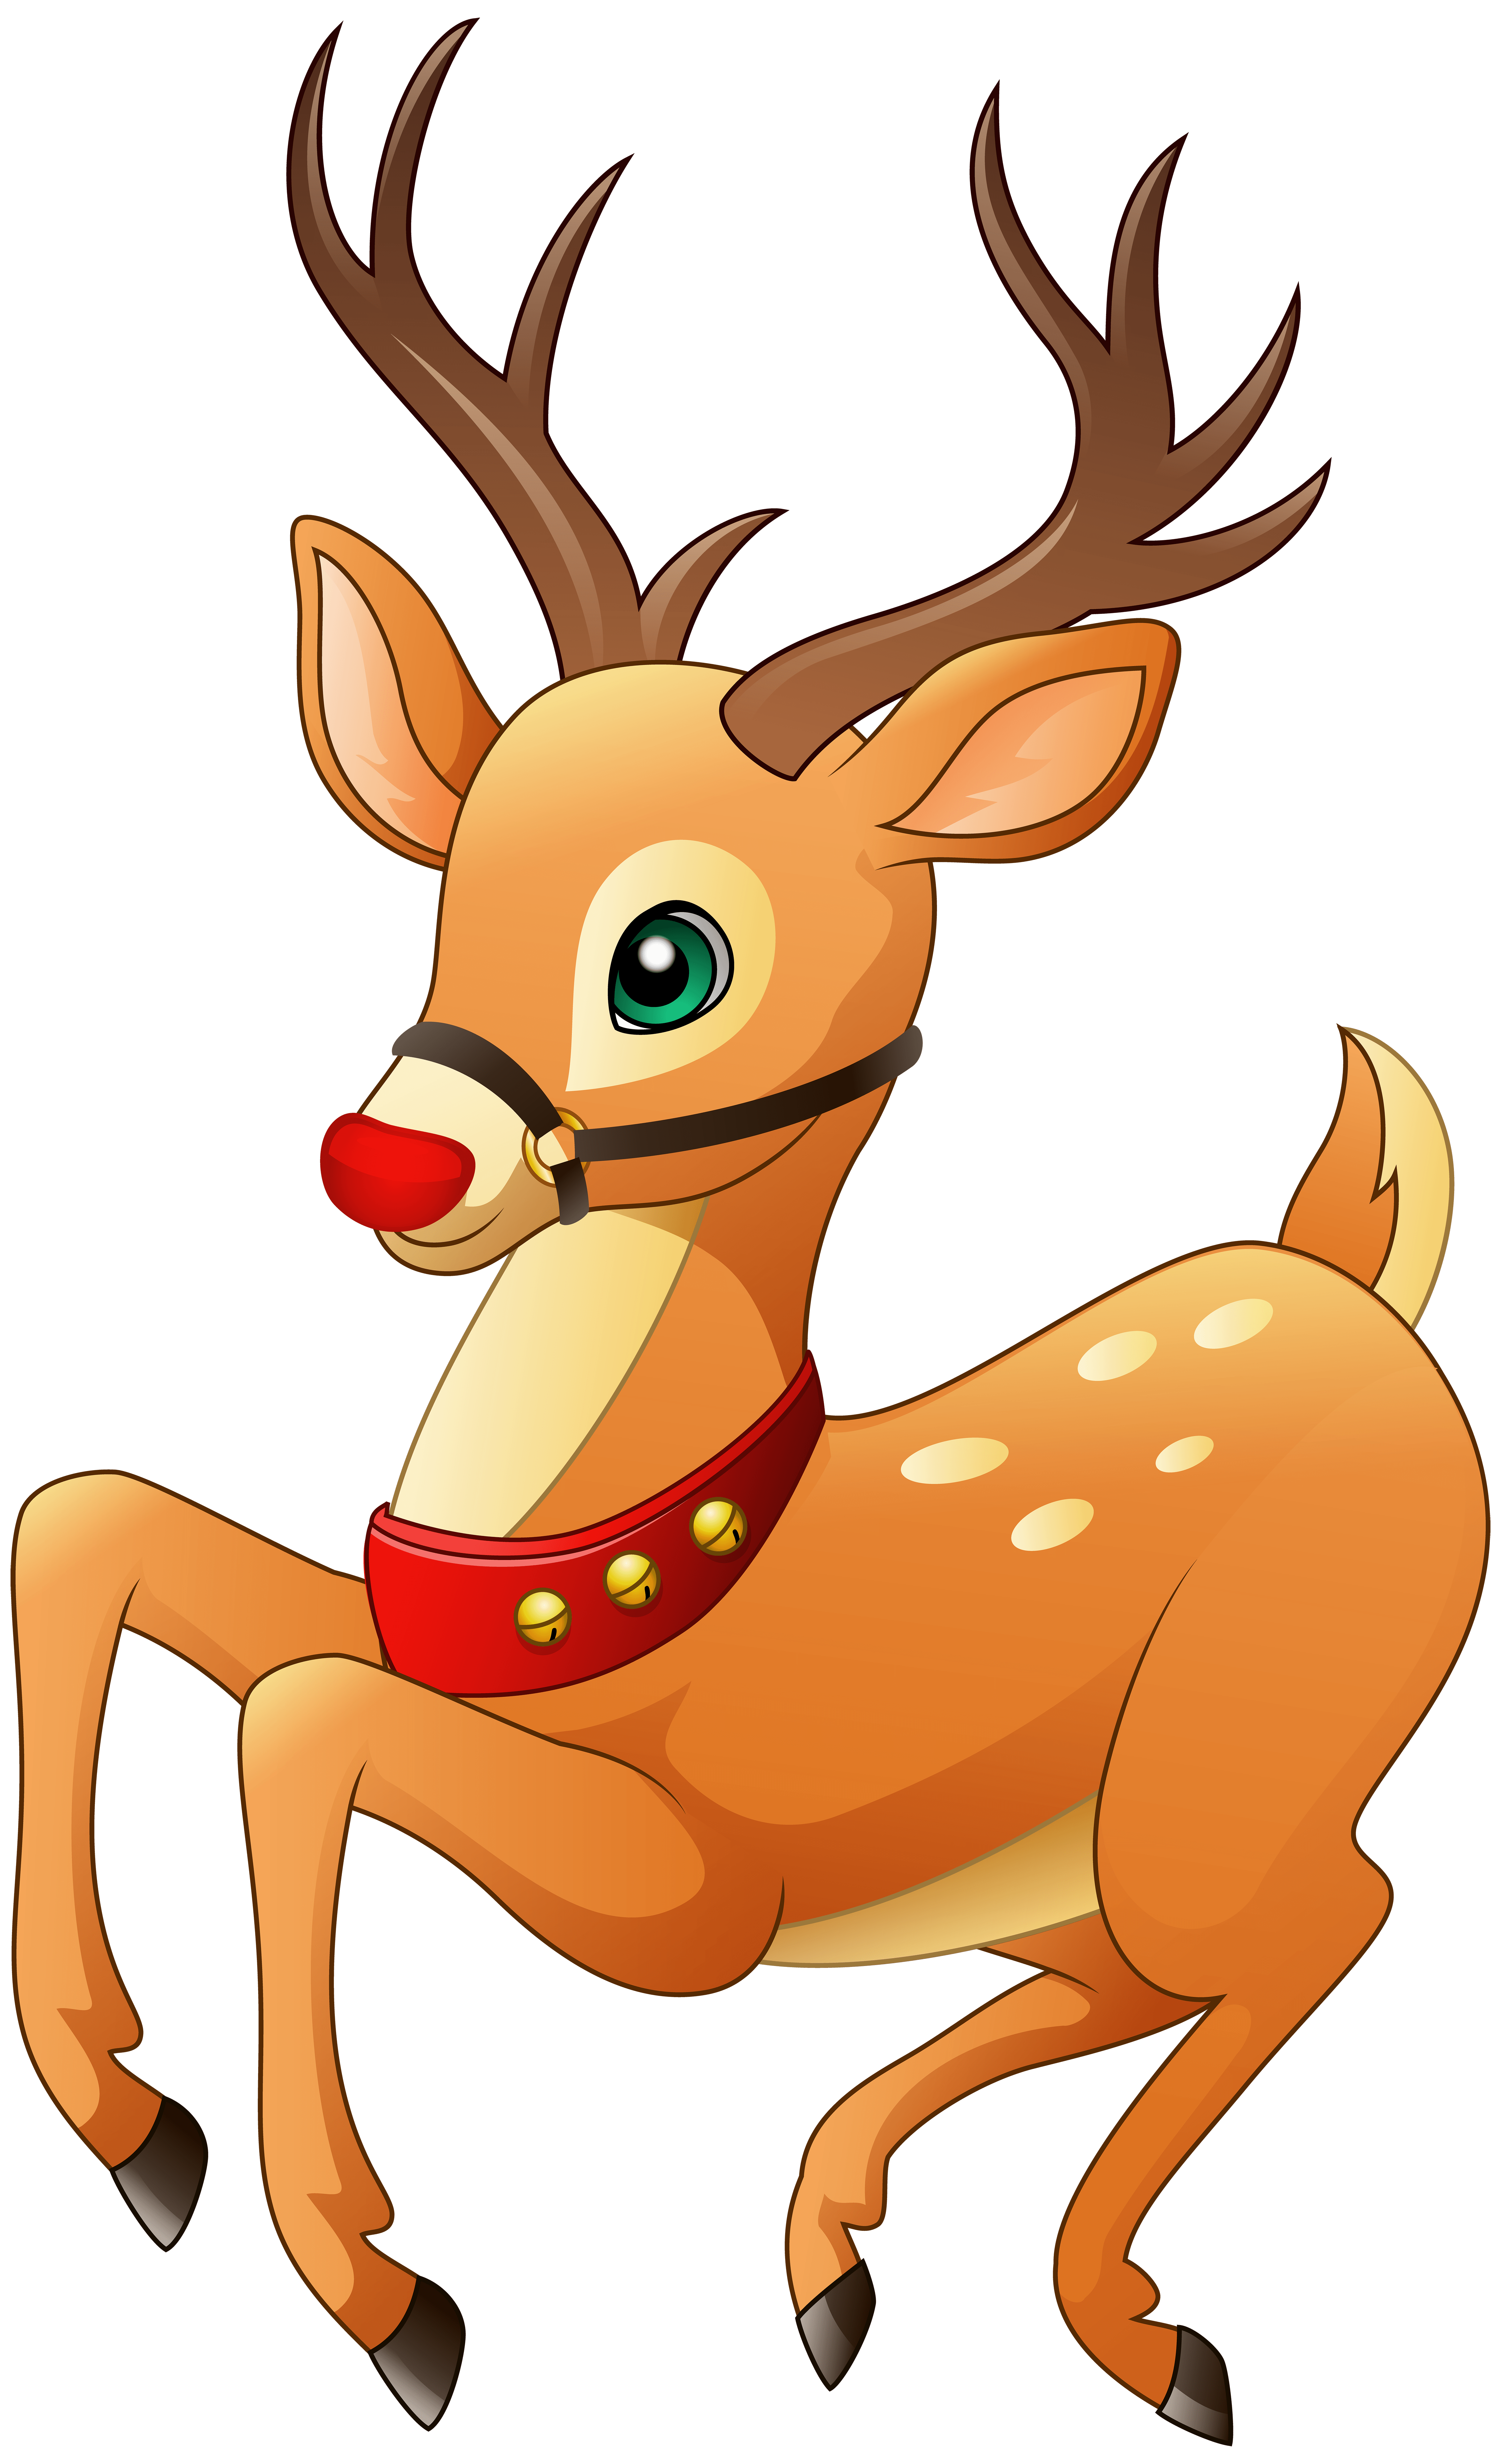 Rudolph PNG Clip Art Image Quality